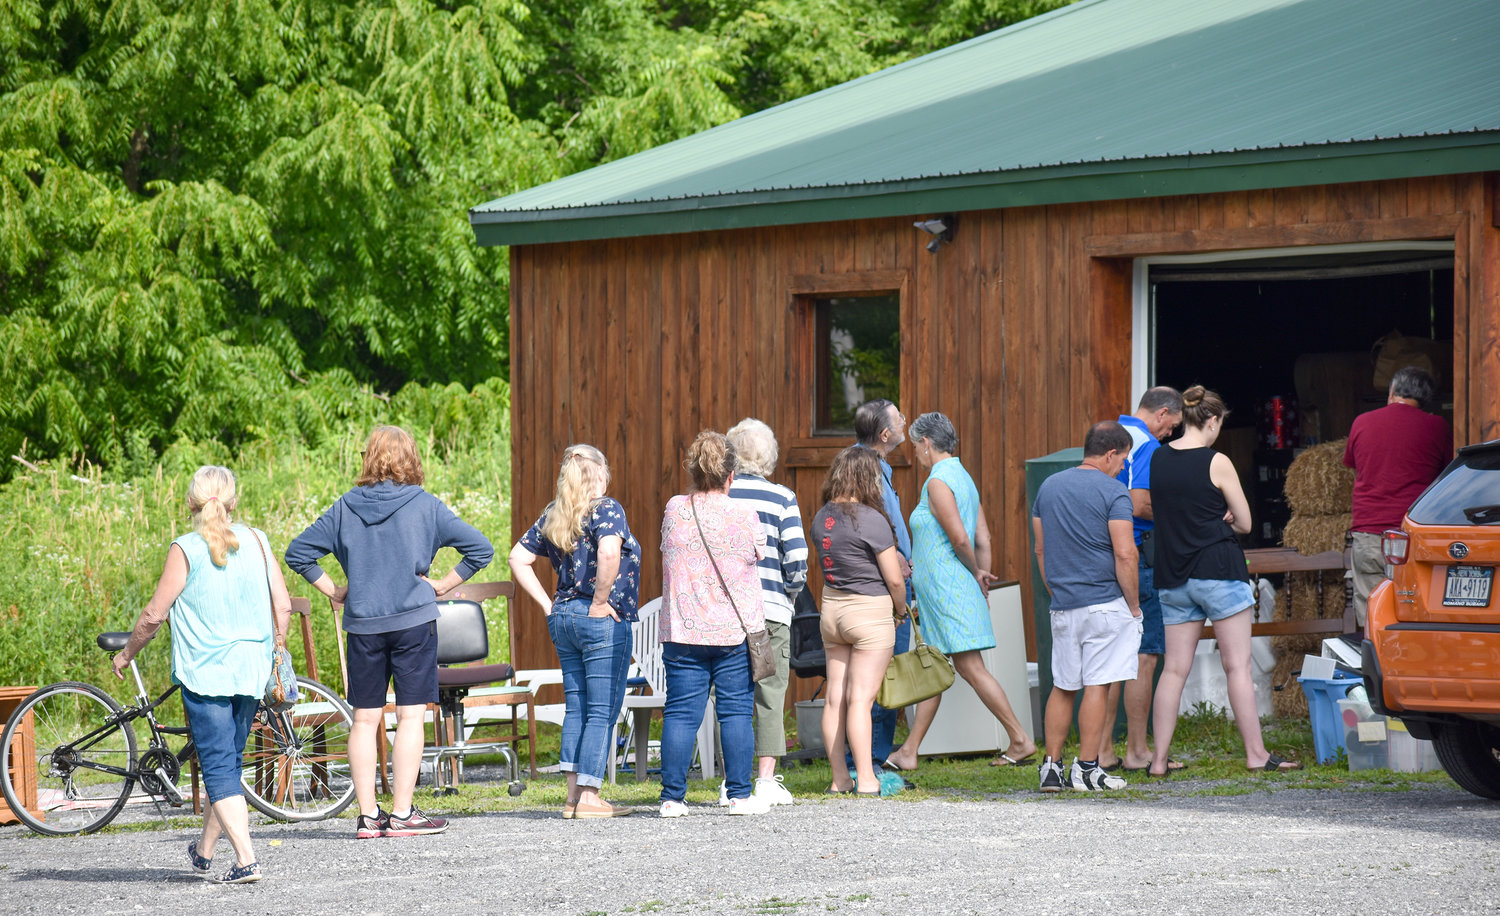 Shoppers line up to browse rows and rows of donated treasures sold for cheap as part of the Great Swamp Conservancy's garage sale fundraiser. The last day of the sale is Saturday, July 9, from 9 a.m. - 3 p.m.